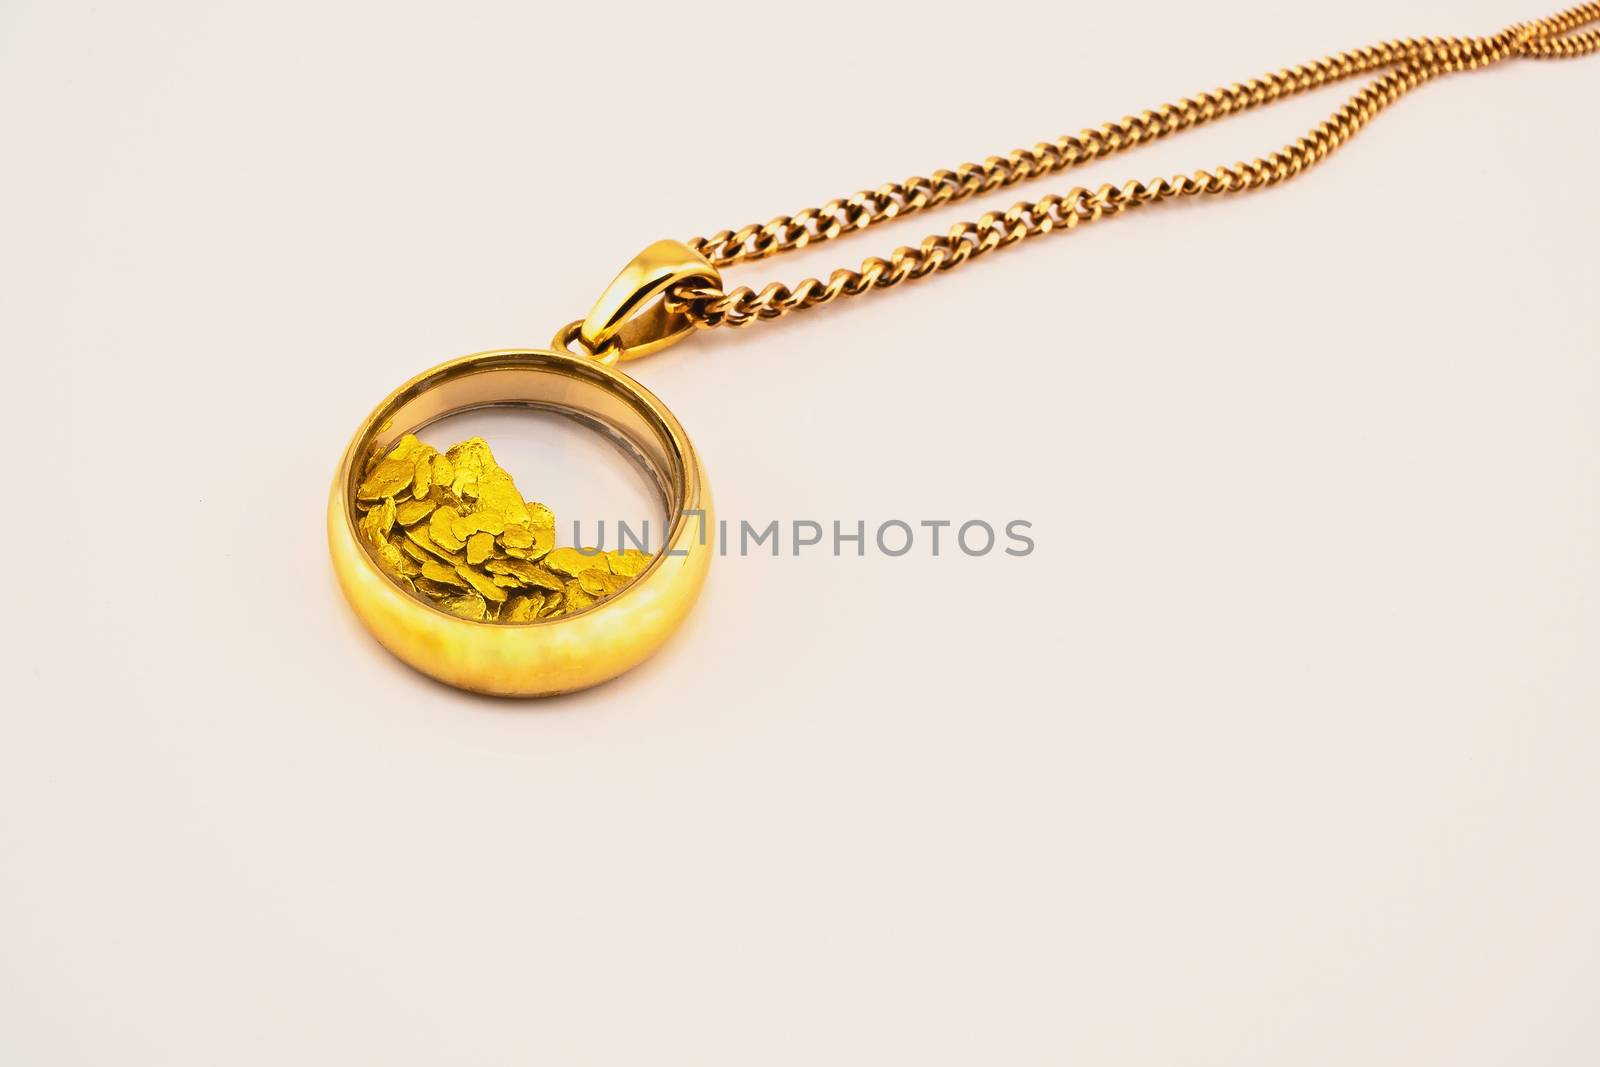 A round gold pendant with glass enclosing gold nuggets, attached to a rose gold chain